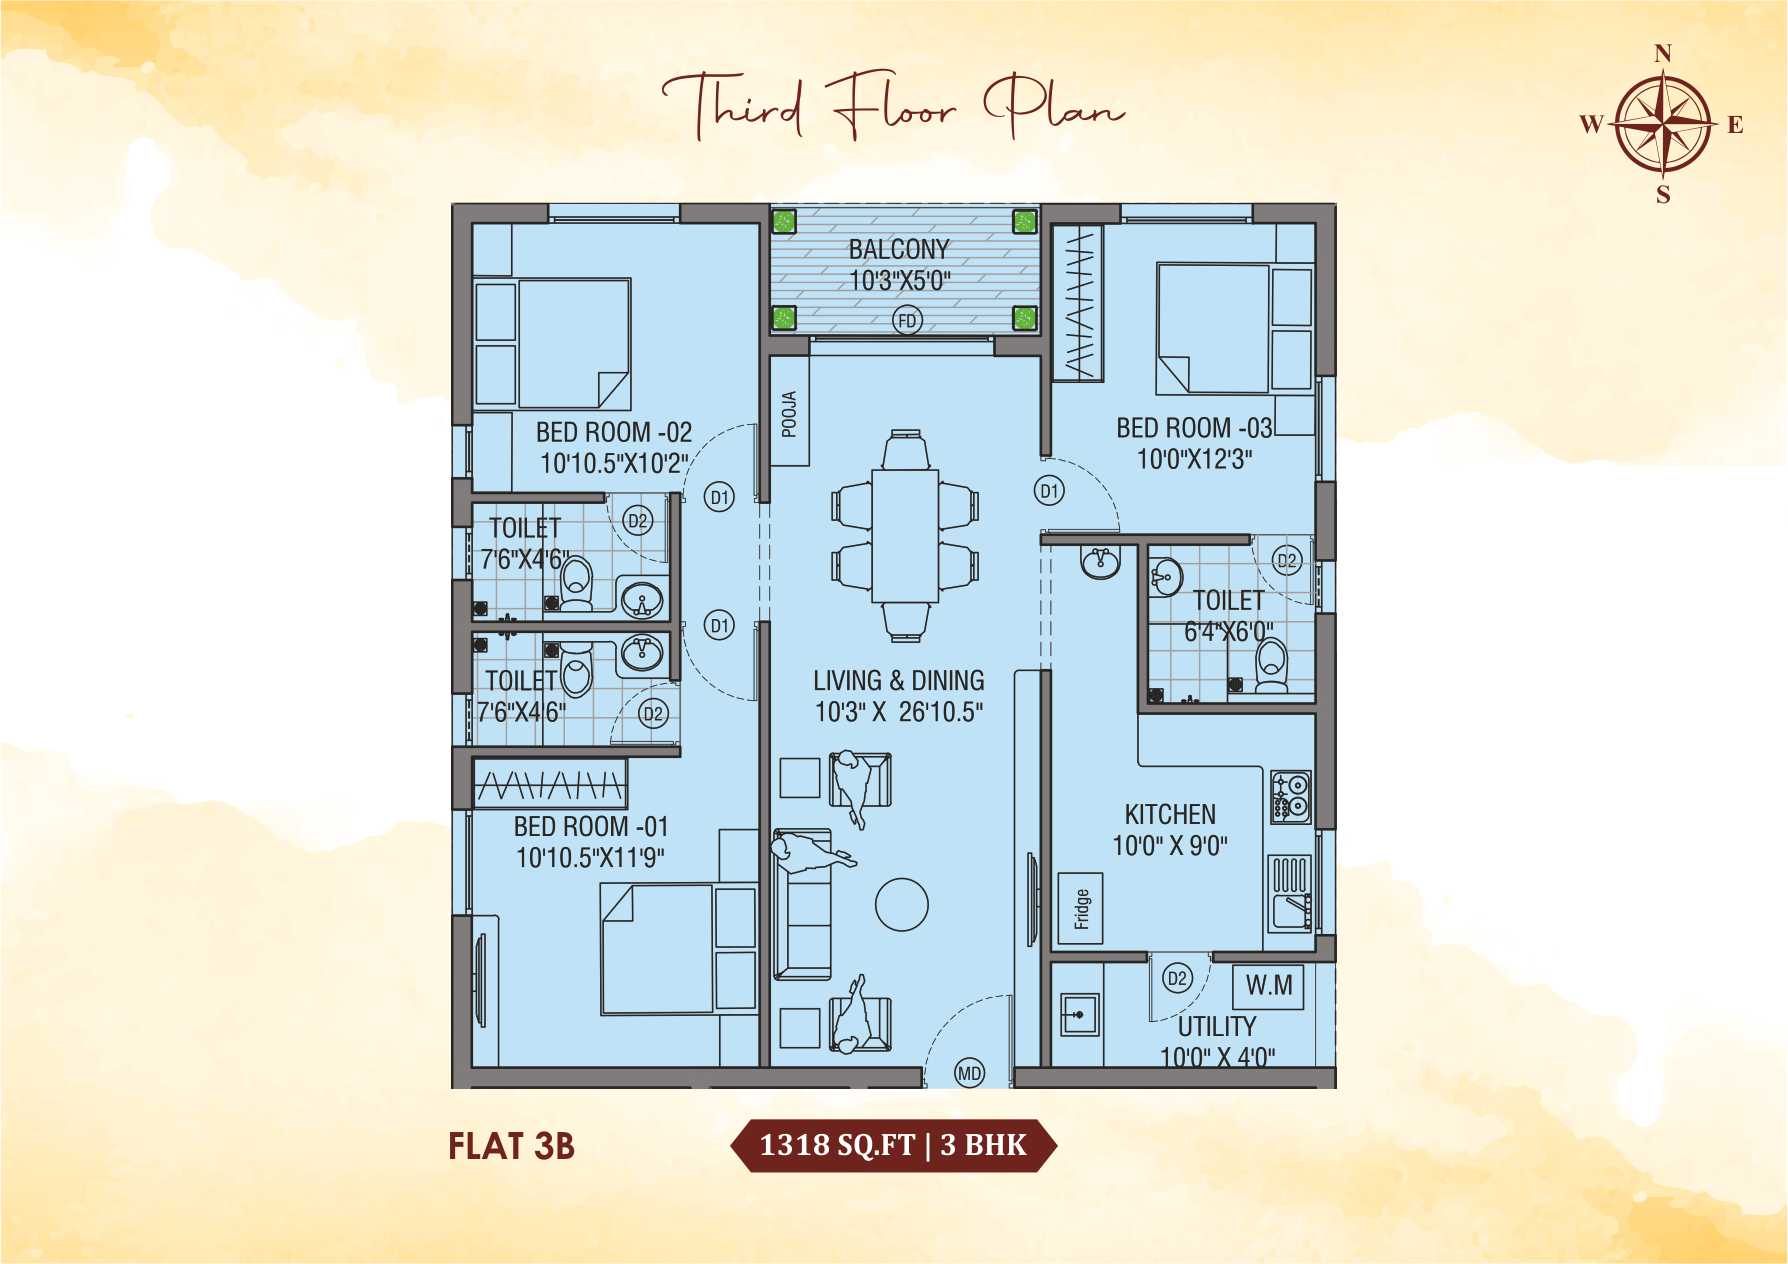 https://www.firmfoundations.in/projects/floorplans/thumbnails/16954468022Thayagam_3rd.jpg